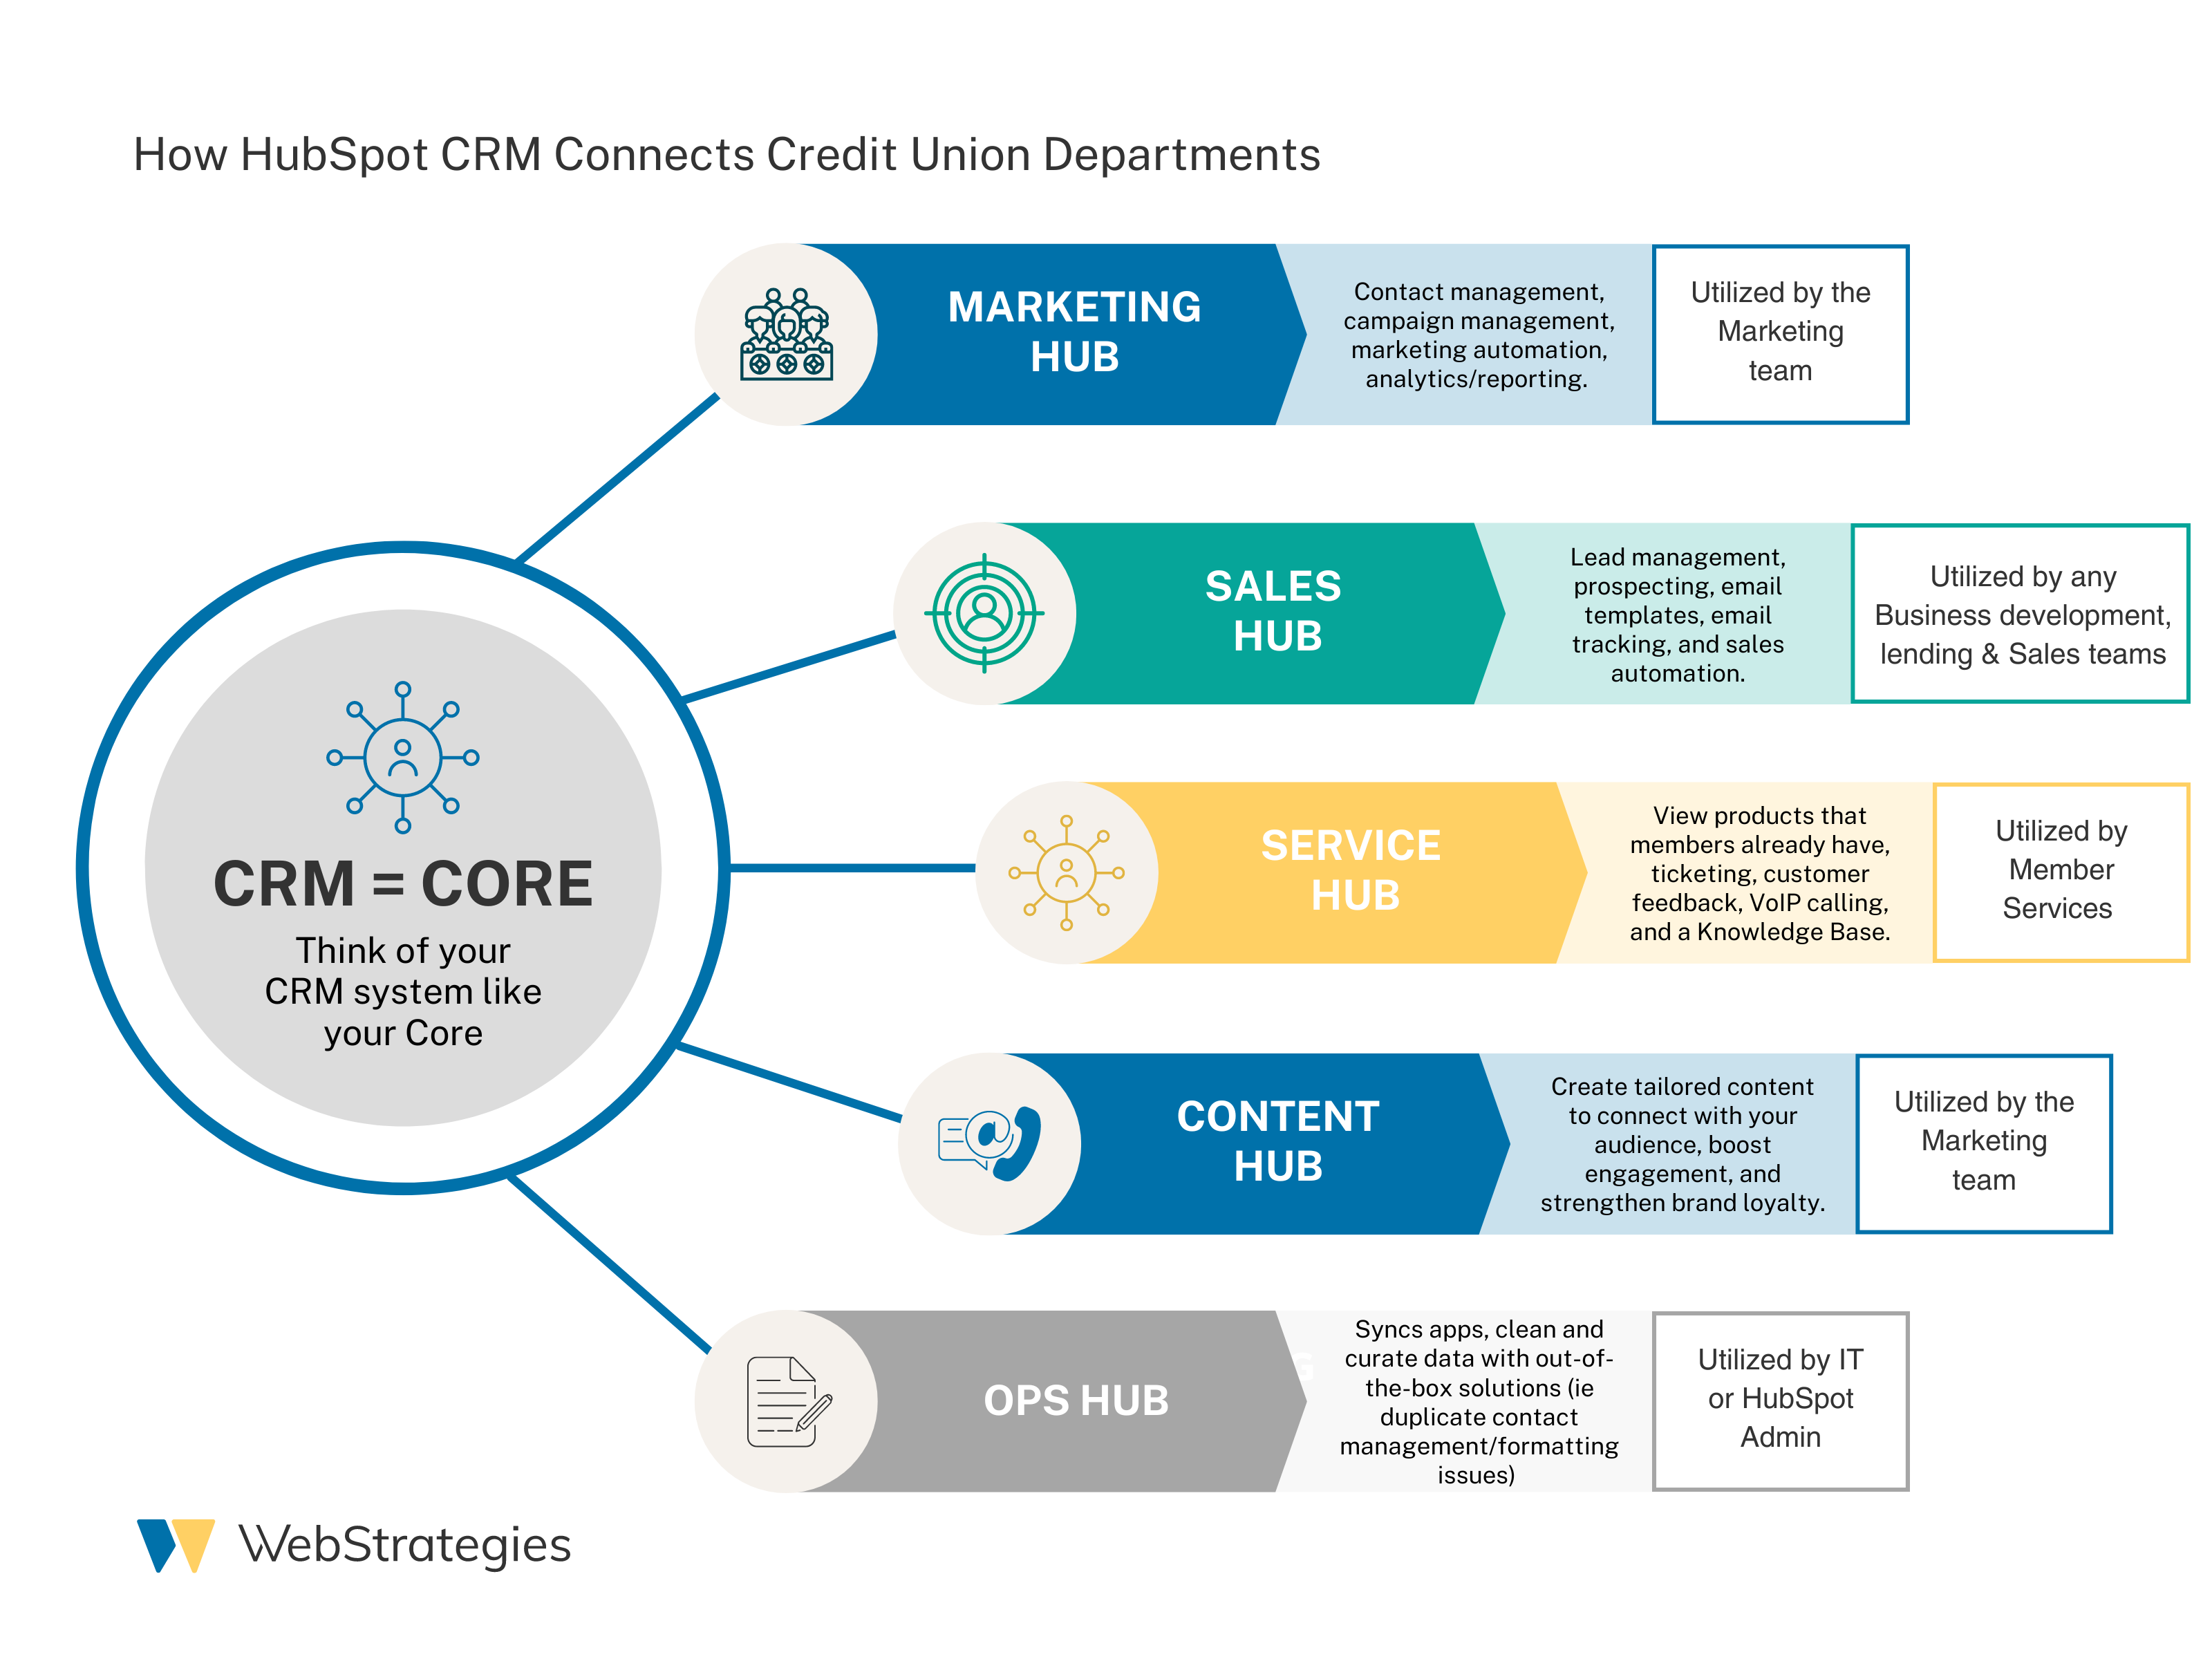 How HubSpot CRM Connects Credit Union Departments